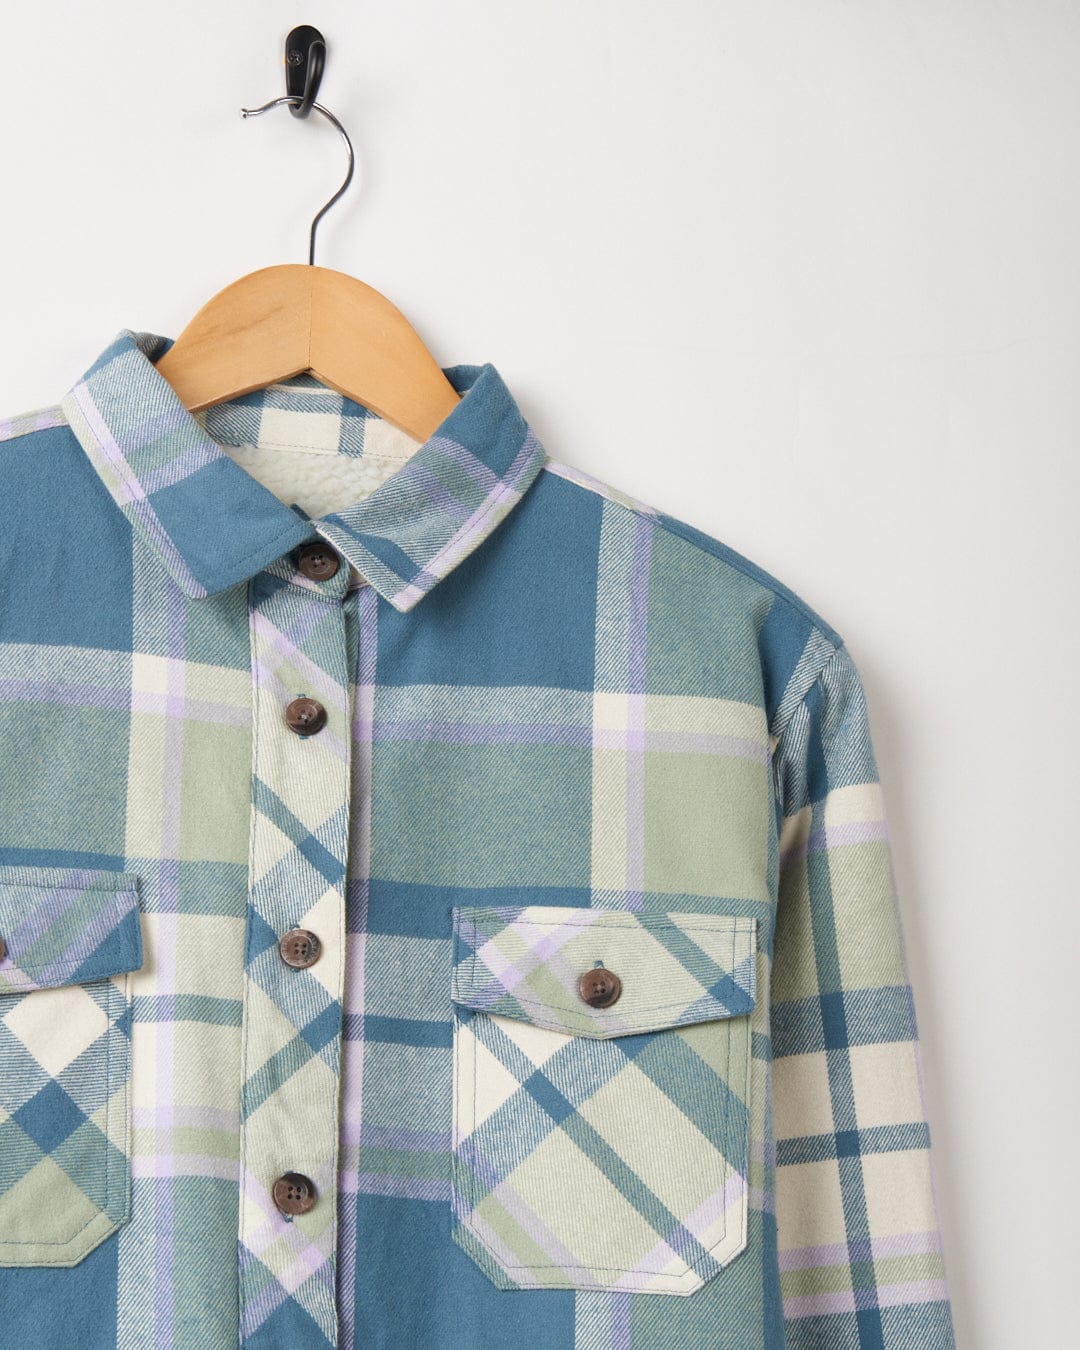 A Stella - Womens Borg Lined Long Sleeve Shirt in shades of blue and green hanging on a wooden hanger against a white background.